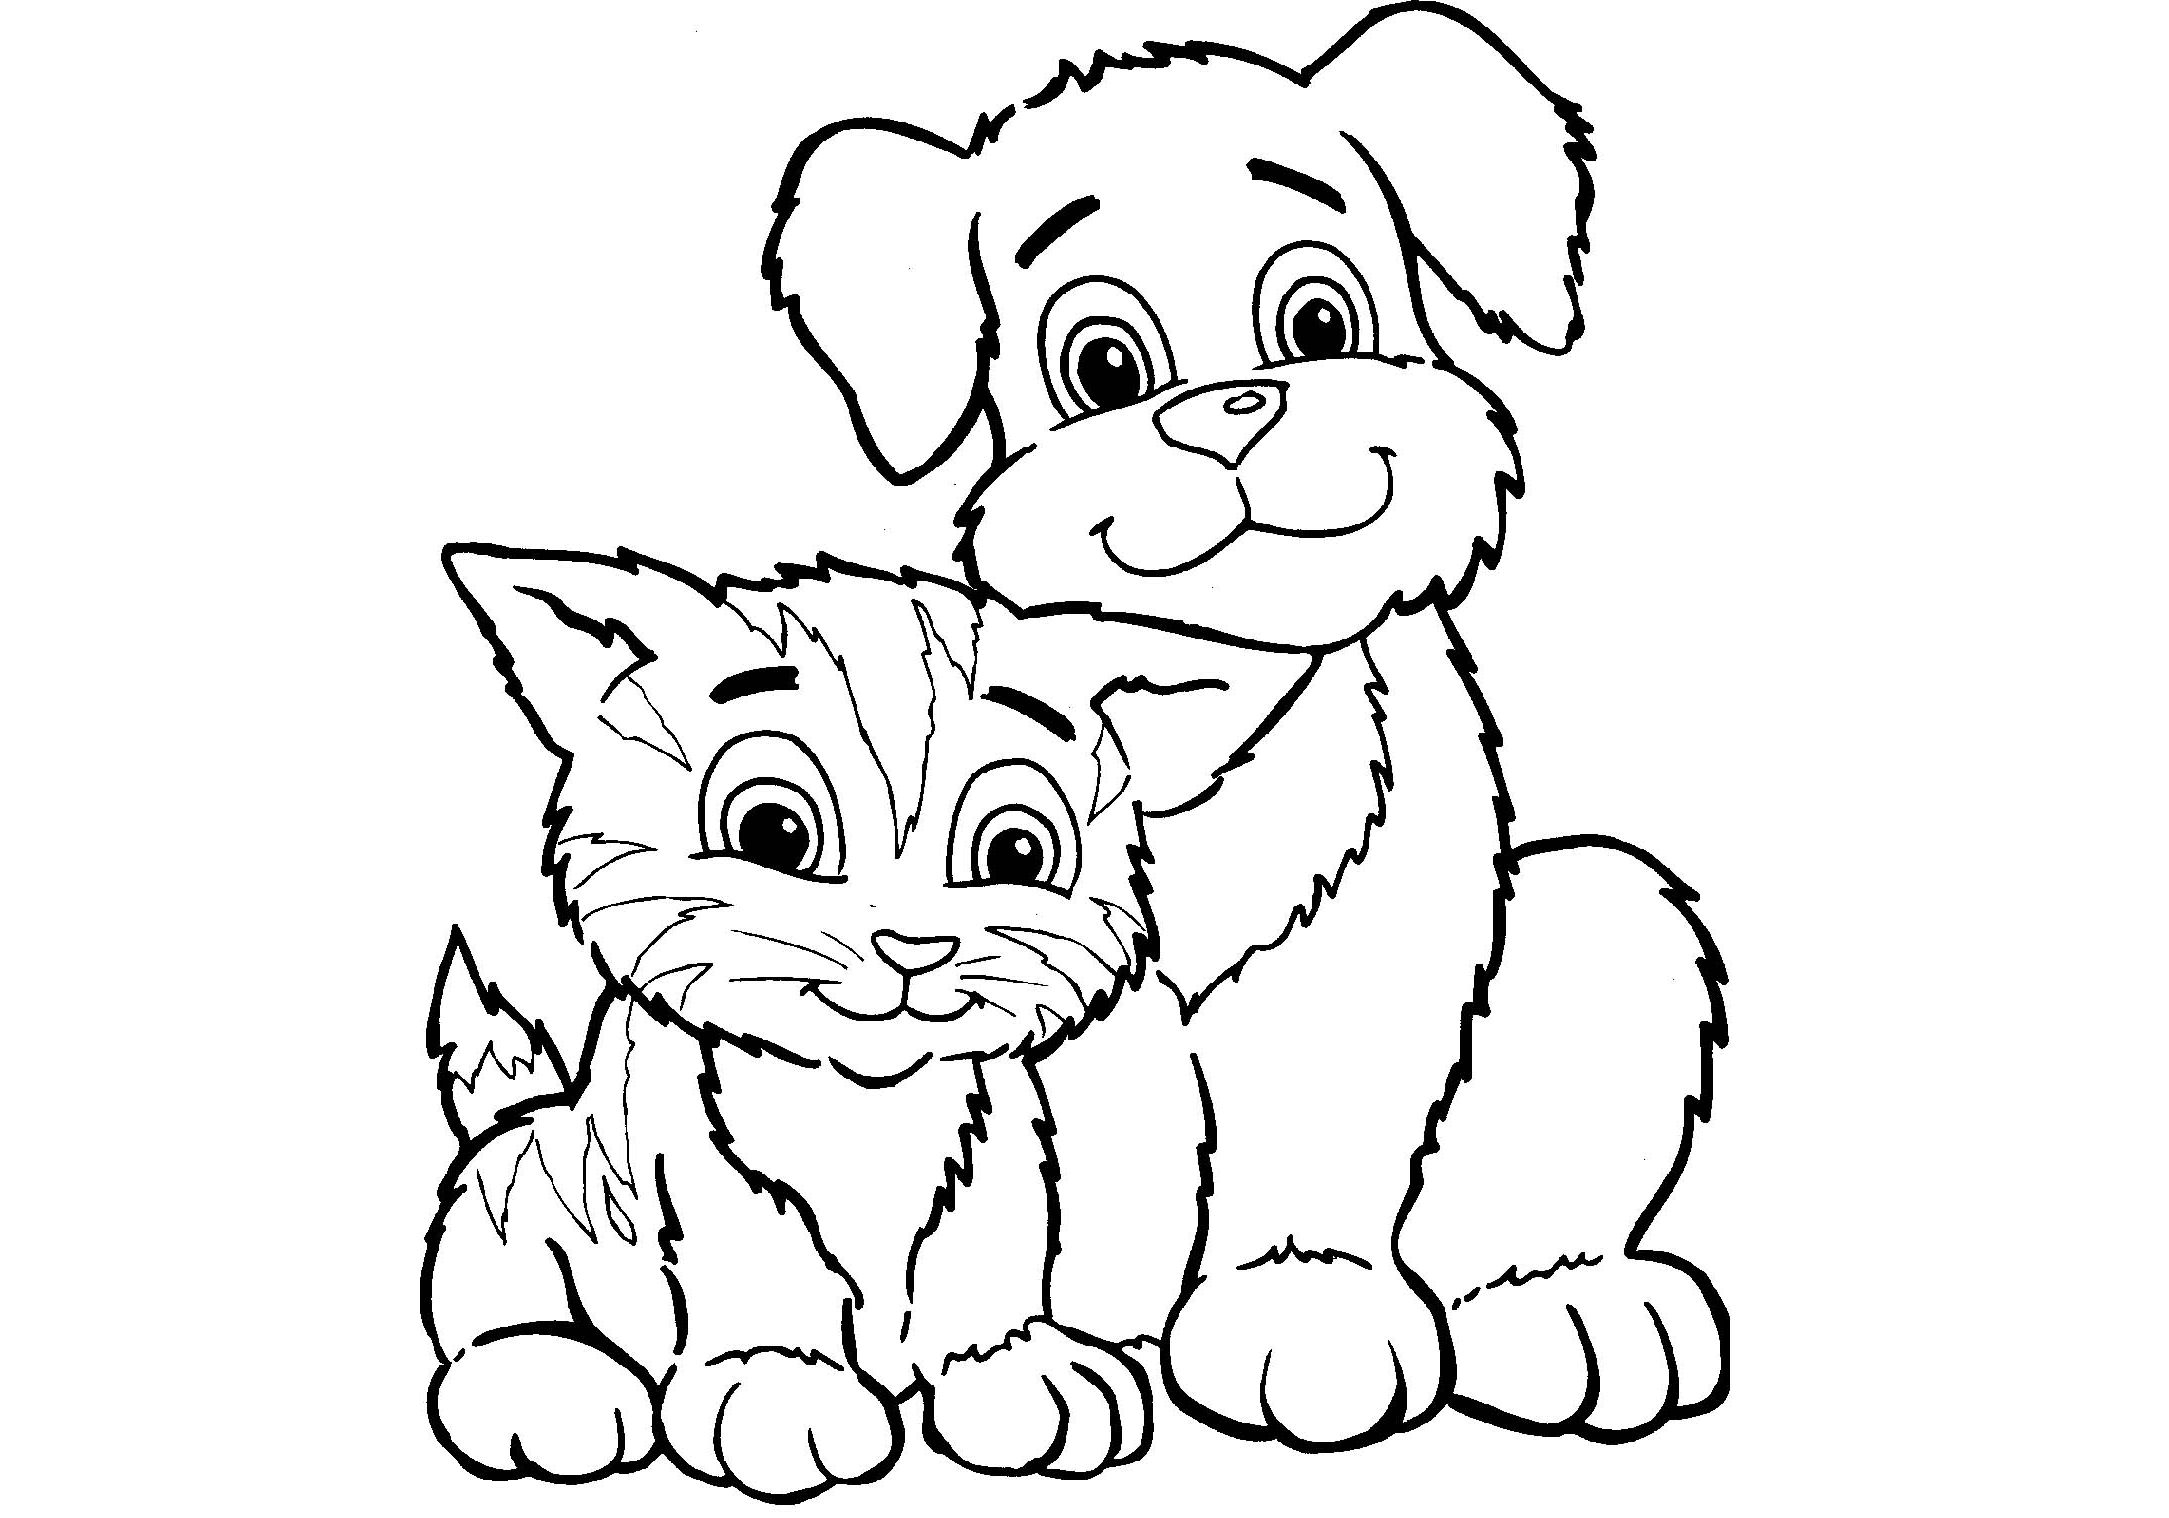 Cute cat and dog coloring pages for kids